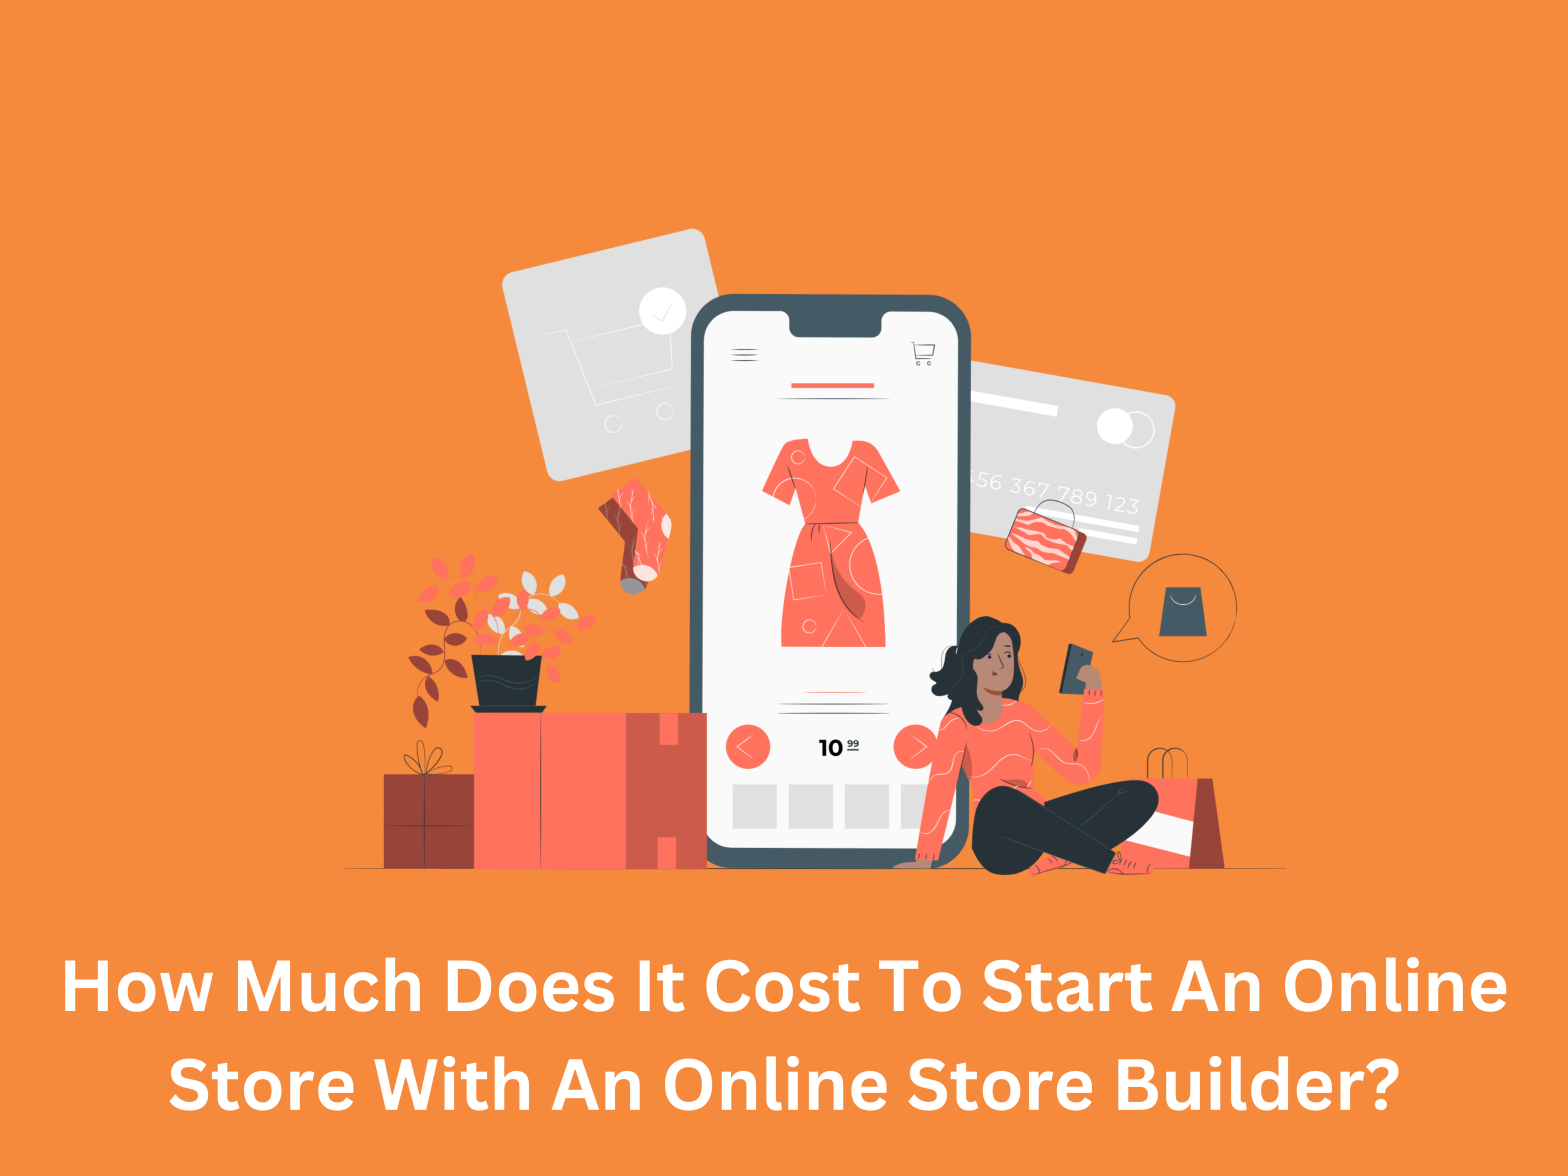 How Much Does It Cost To Start An Online Store With An Online Store Builder?